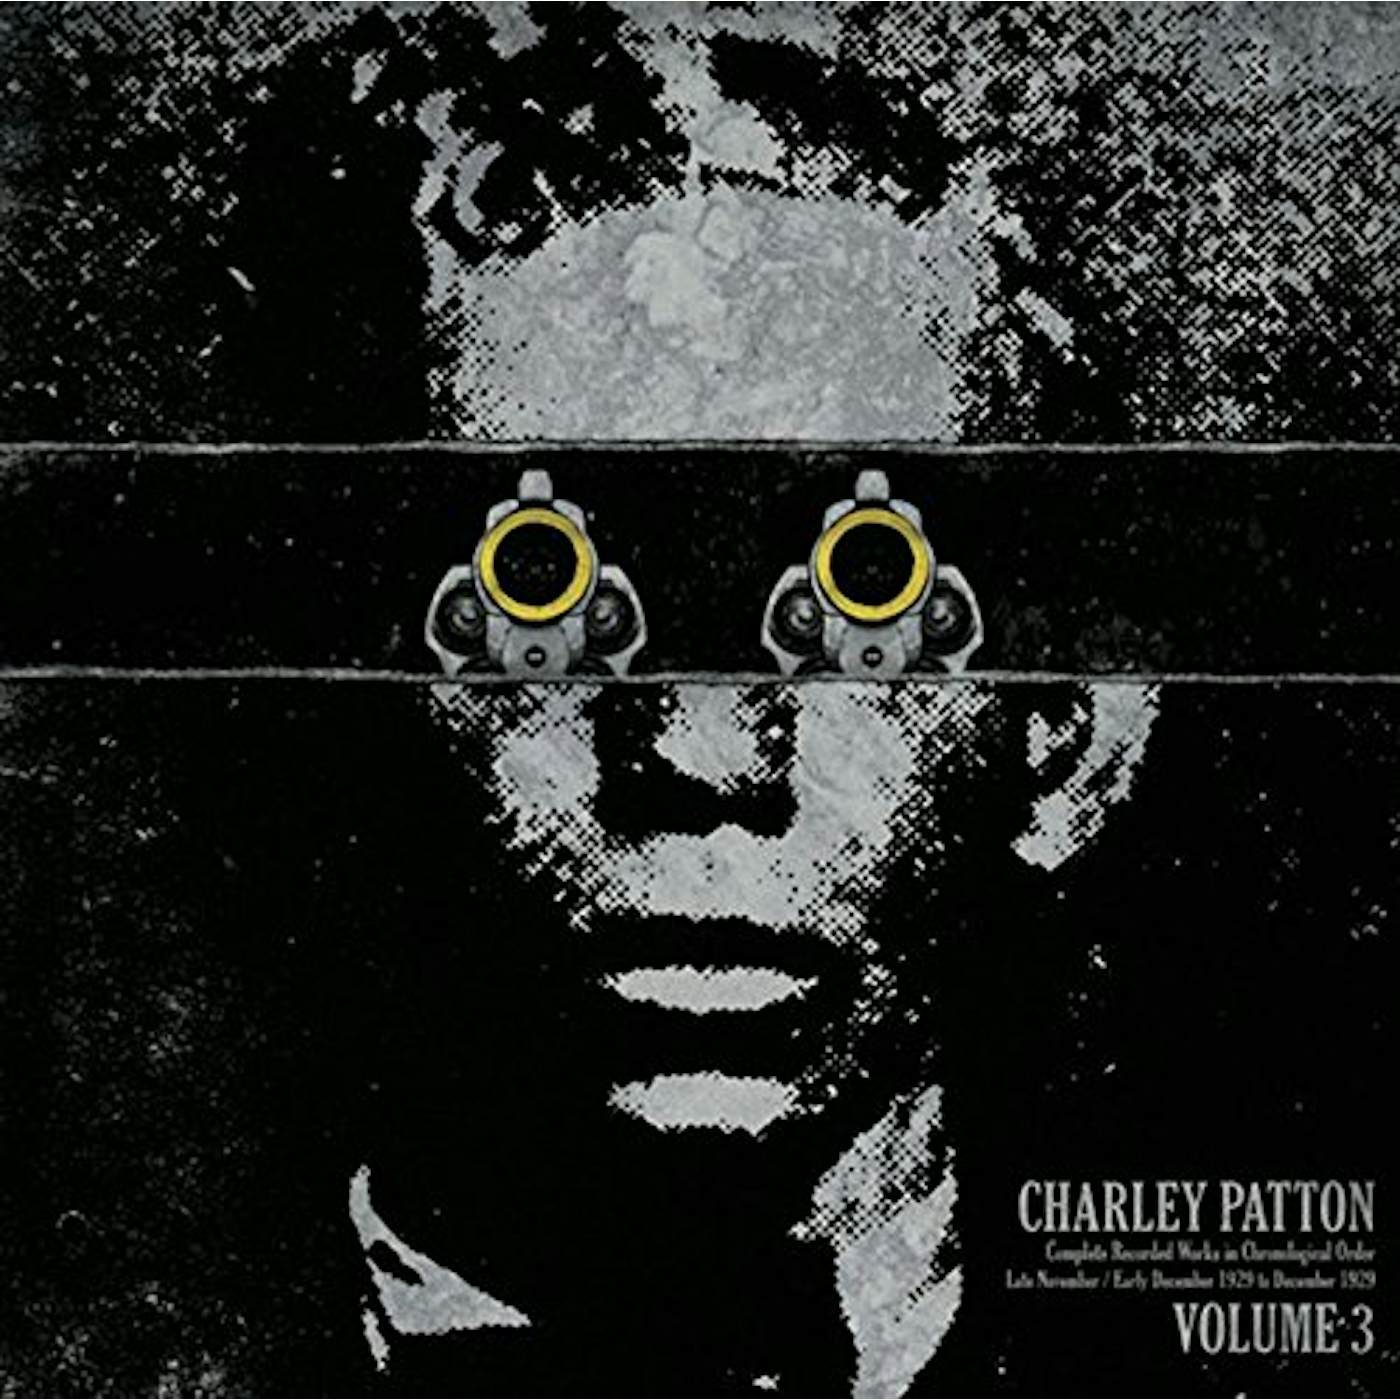 Charley Patton COMPLETE RECORDED WORKS IN CHRONOLOGICAL ORDER 3 Vinyl Record